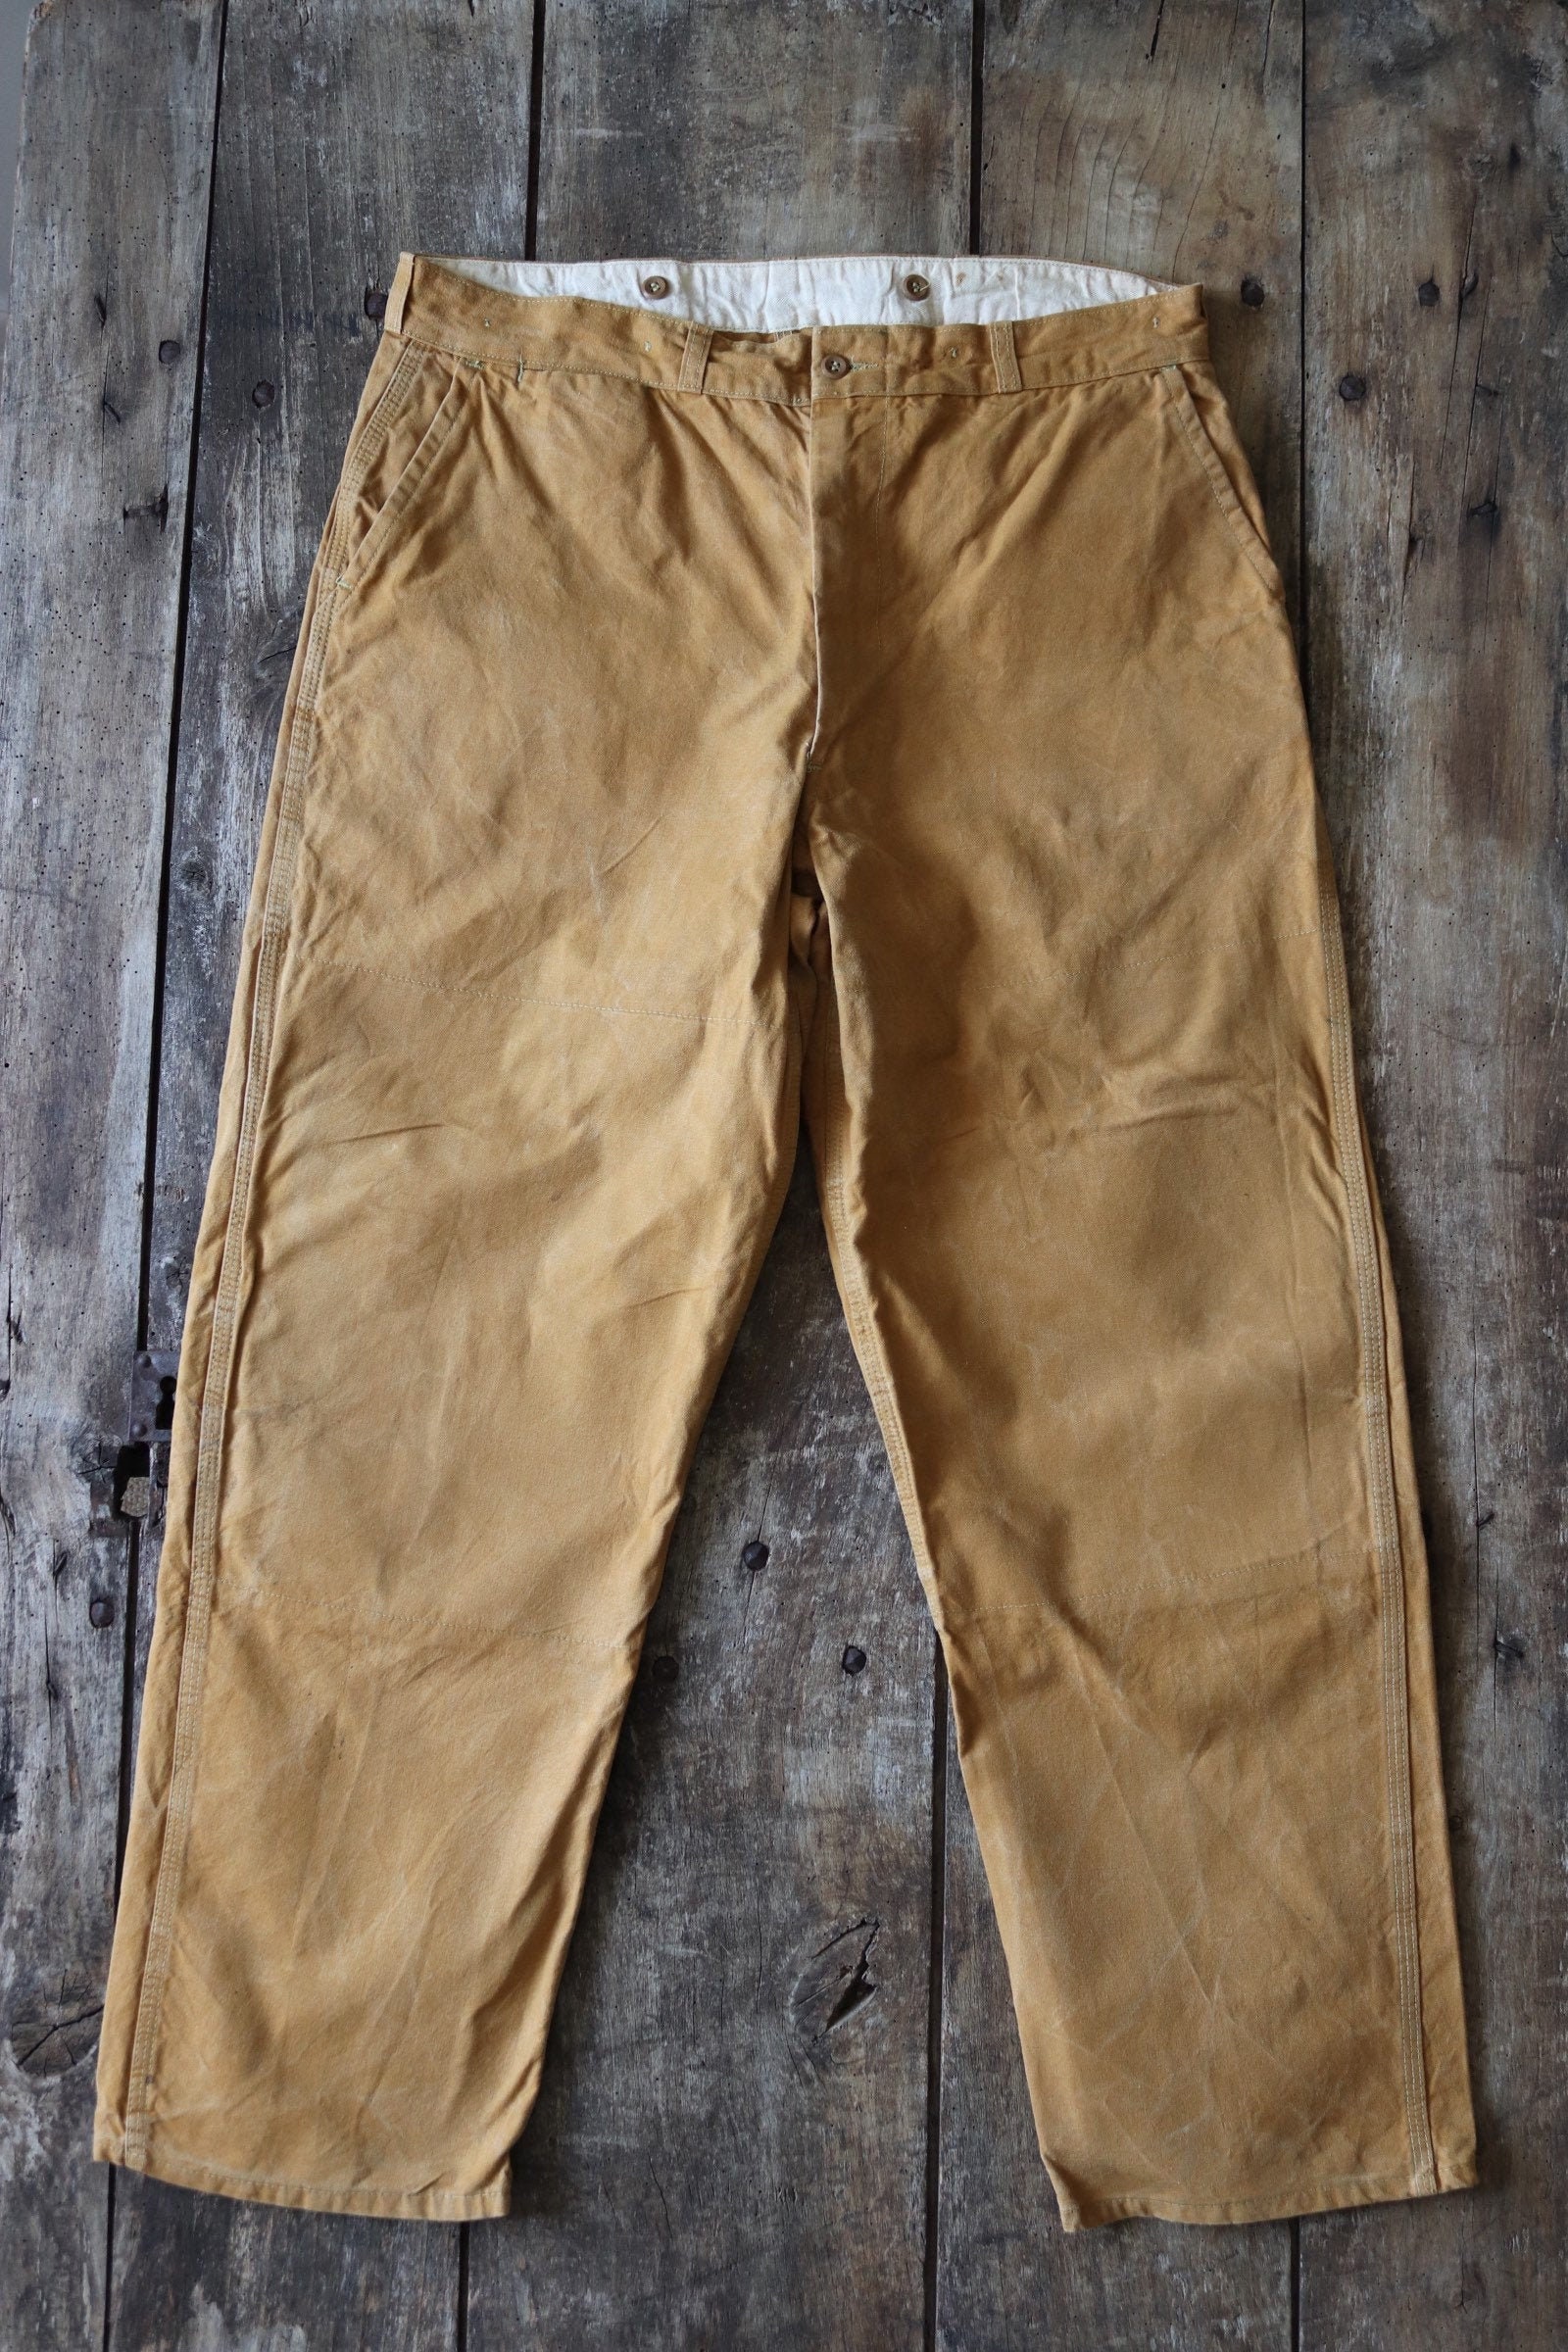 Vintage 1960s 60s Revelation hunting utility field trousers pants work ...